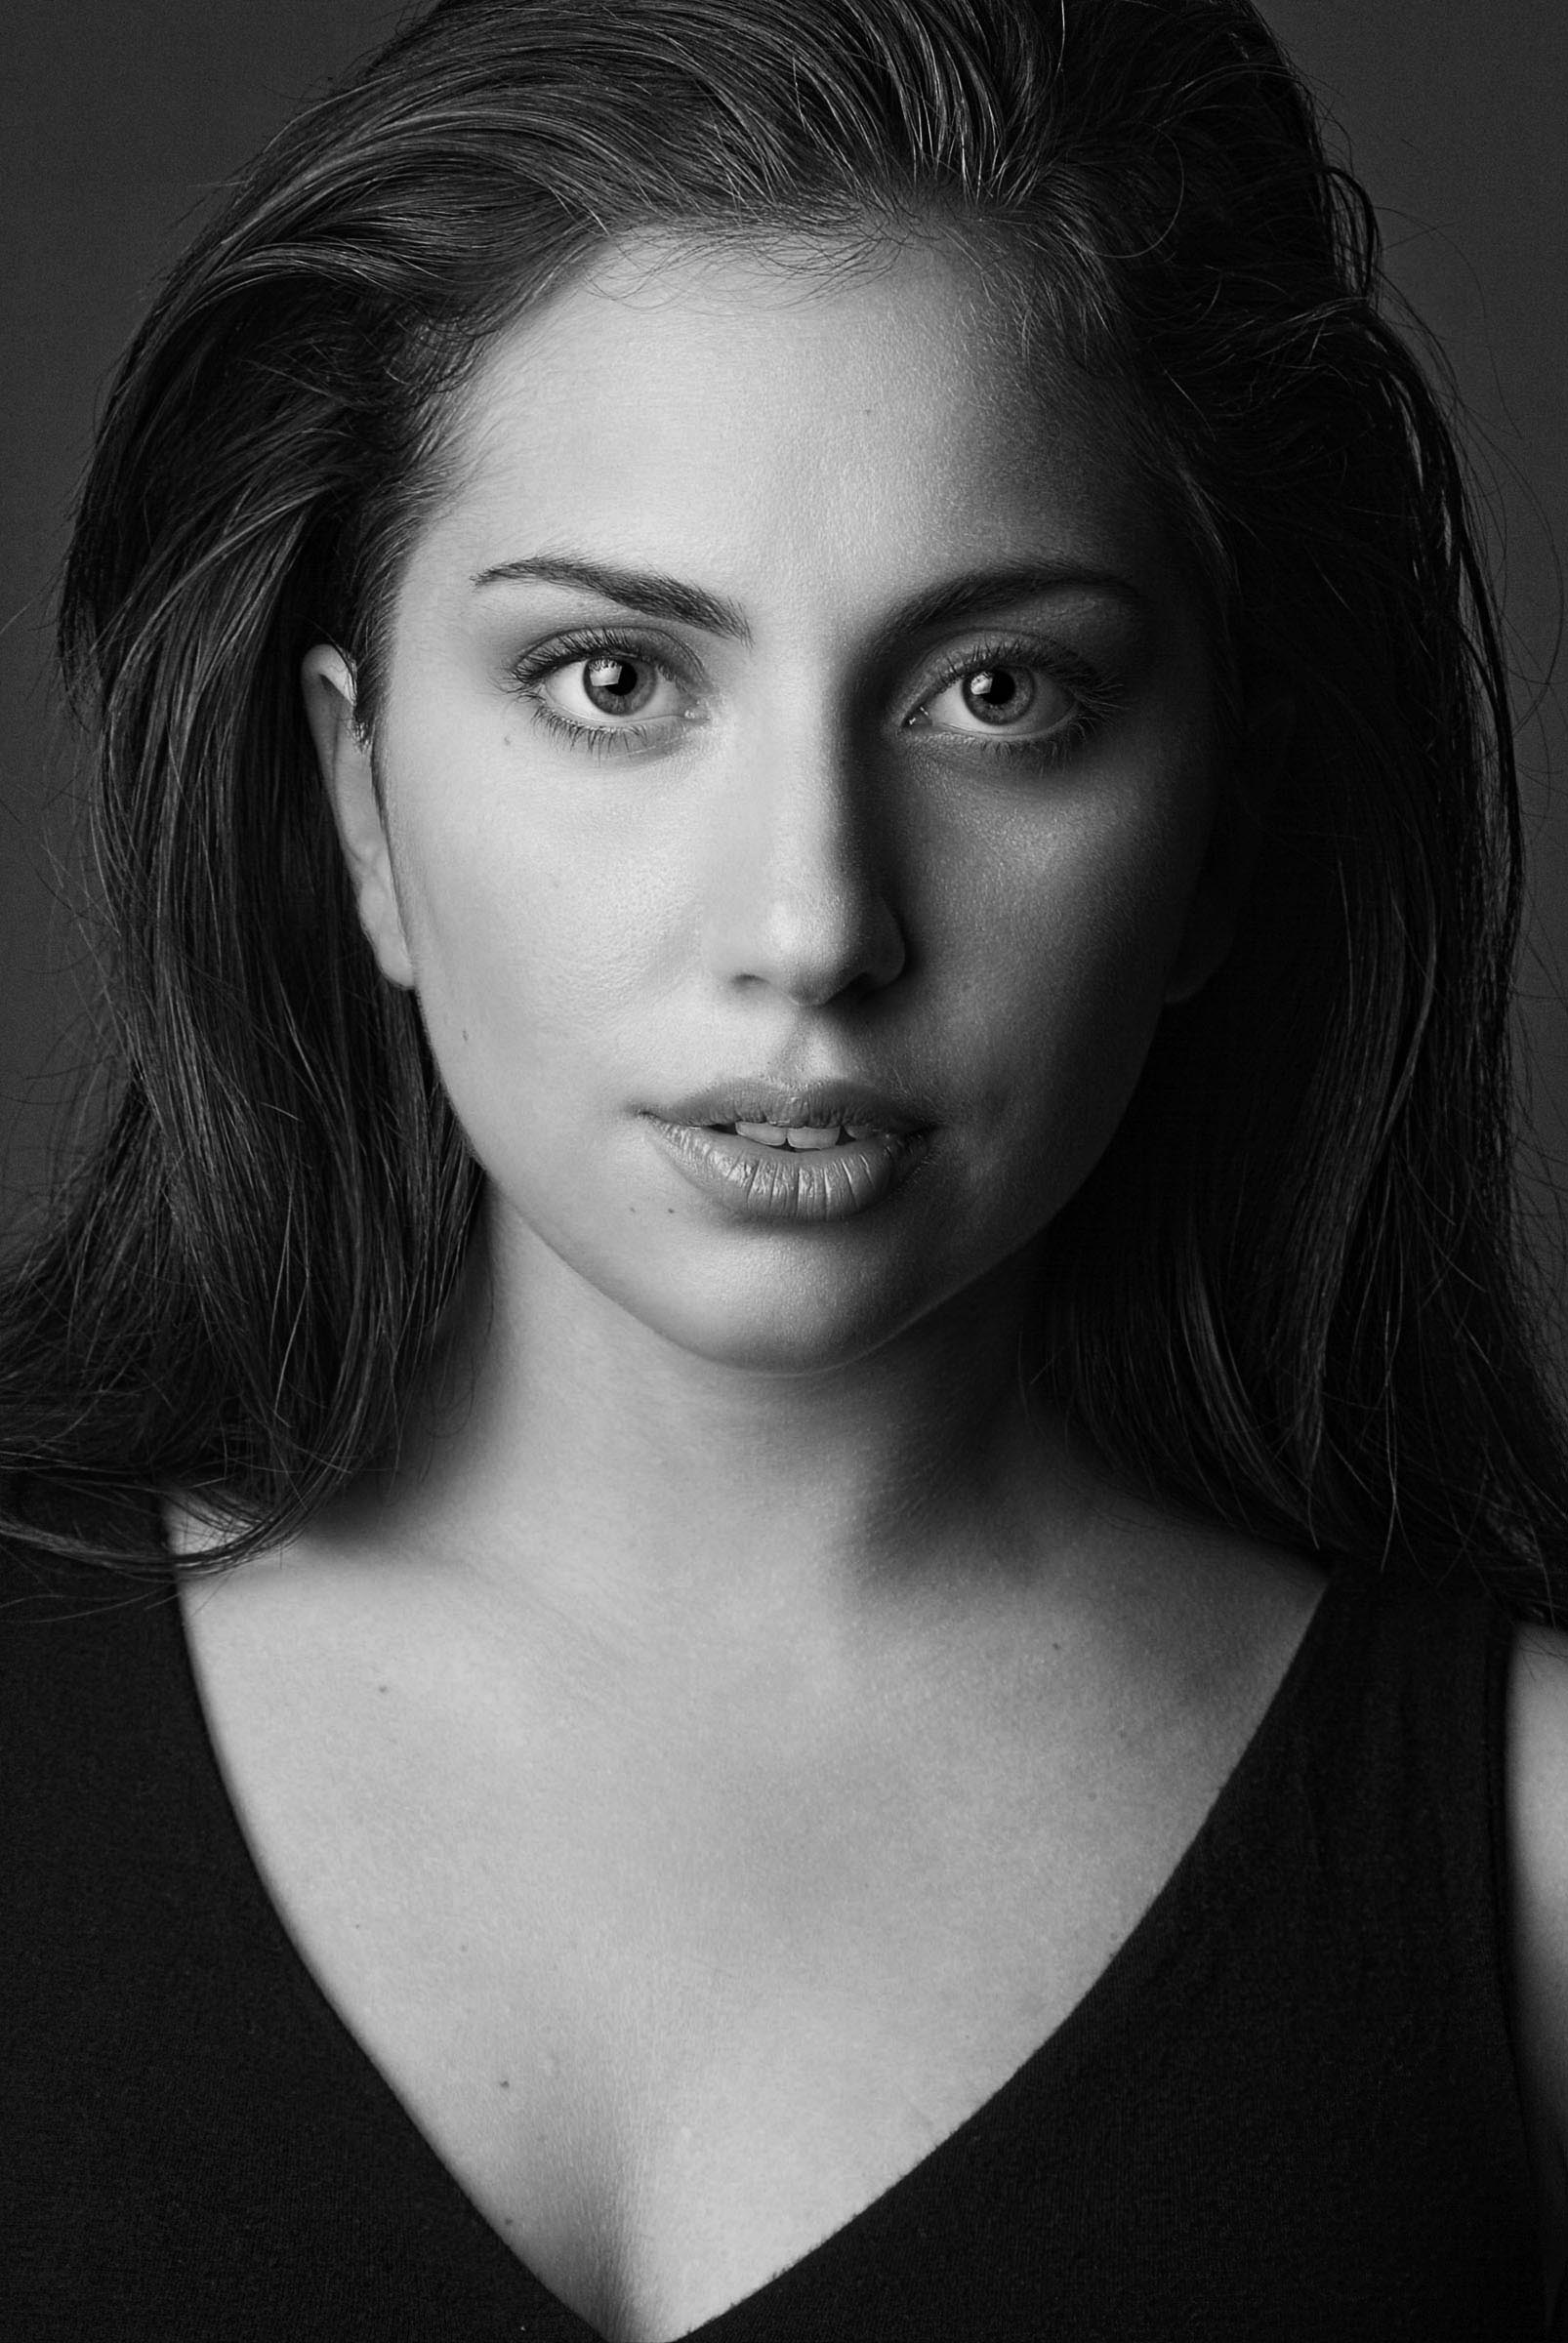 Stefani Joanne Angelina Germanotta, known as Lady Gaga, is an American singer, songwriter, and actress known for her image reinventions and musical versatility, NYC Actors Headshots by Tess Steinkolk